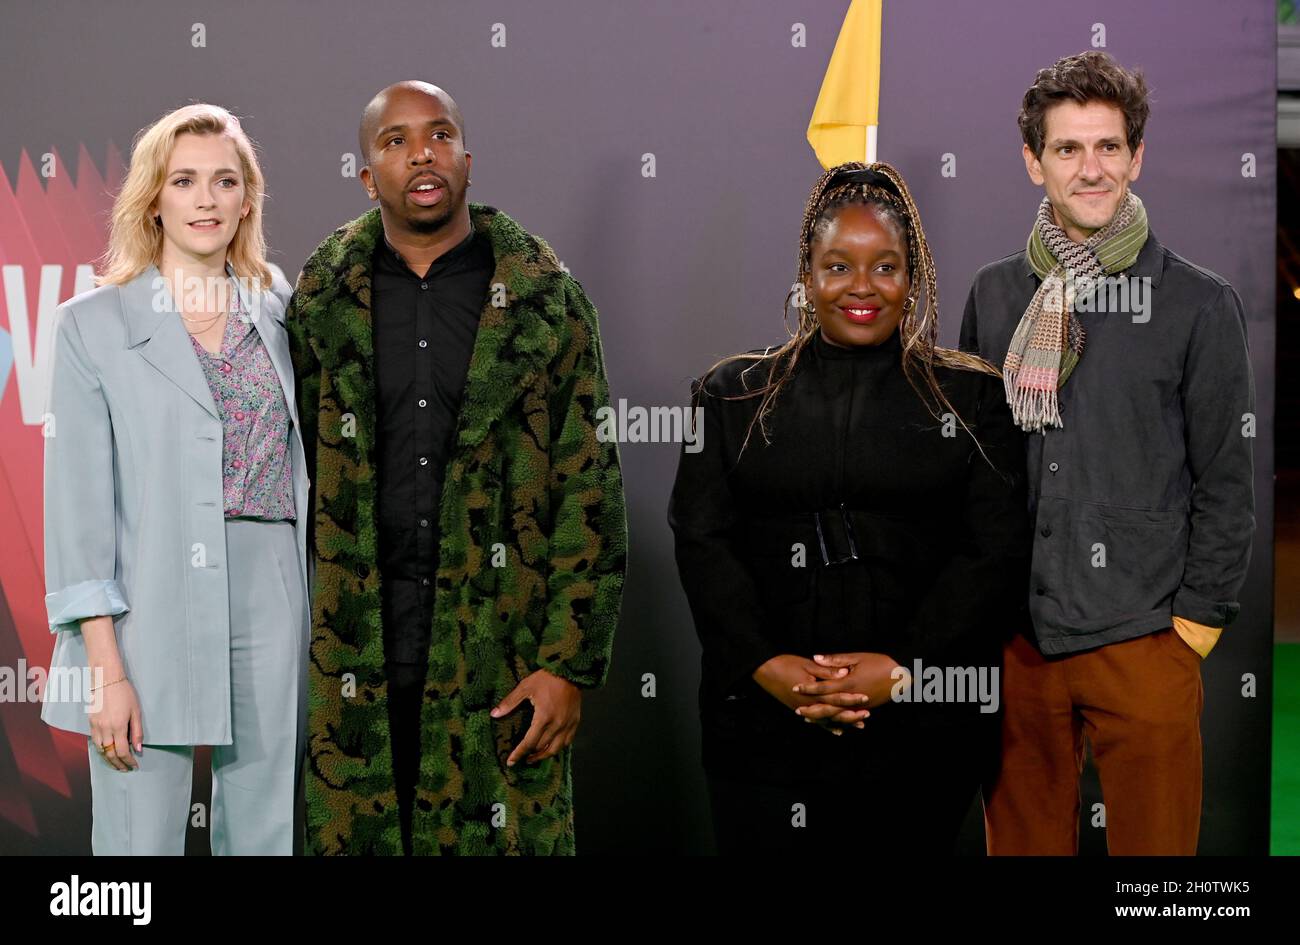 Photo Must Be Credited ©Alpha Press 079965 12/10/2021 Charlotte Ritchie, Kiell Smith Bynoe, Lolly Adefope and Mathew Baynton at the Phantom of the Open World Premiere During The BFI London Film Festival 2021 In London Stock Photo